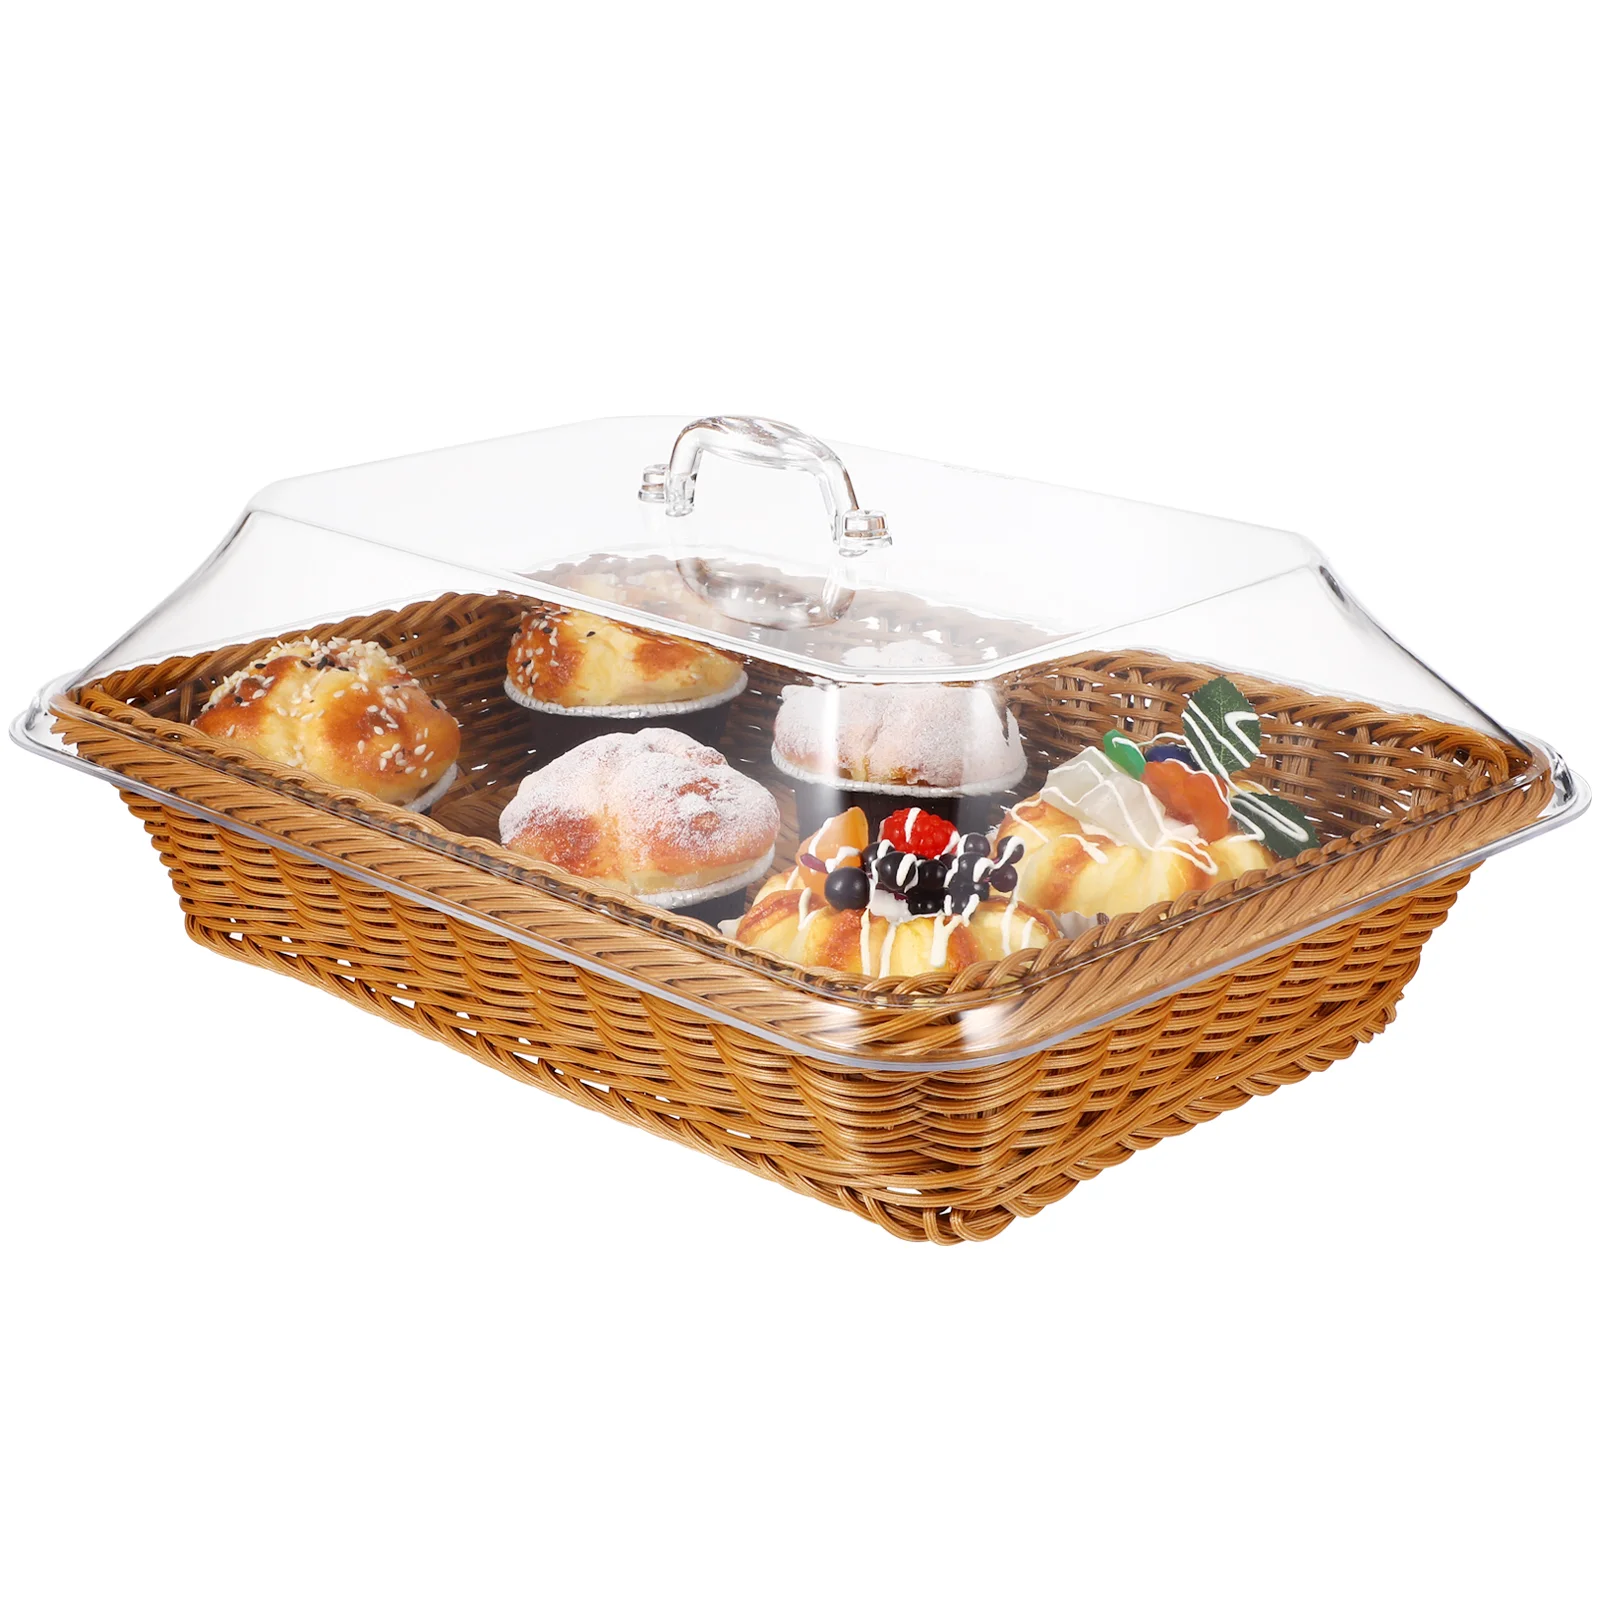 

Imitation Rattan Woven Basket Small Fruit Baskets Simulated Seagrass Vegetable Bread